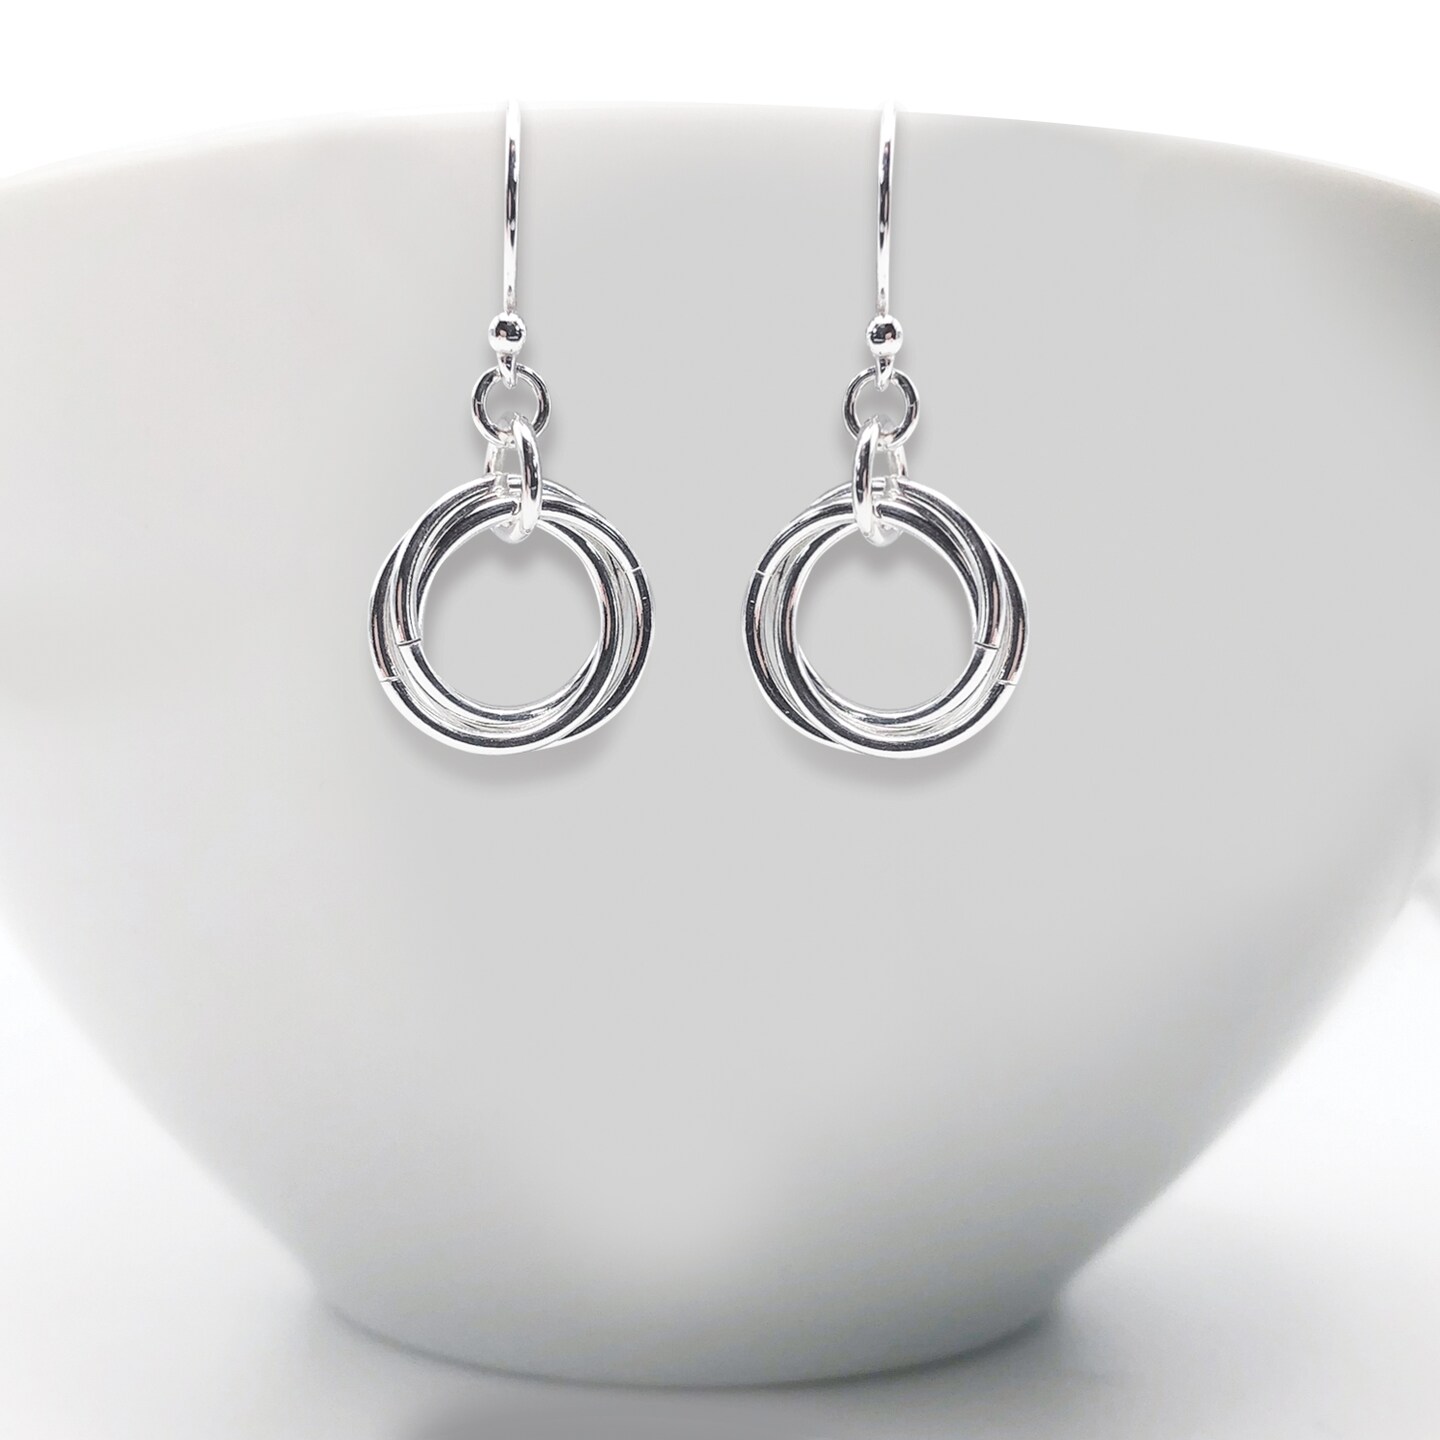 Silver Gifts Online | Buy Silver Gifts For Women/Men | IGP